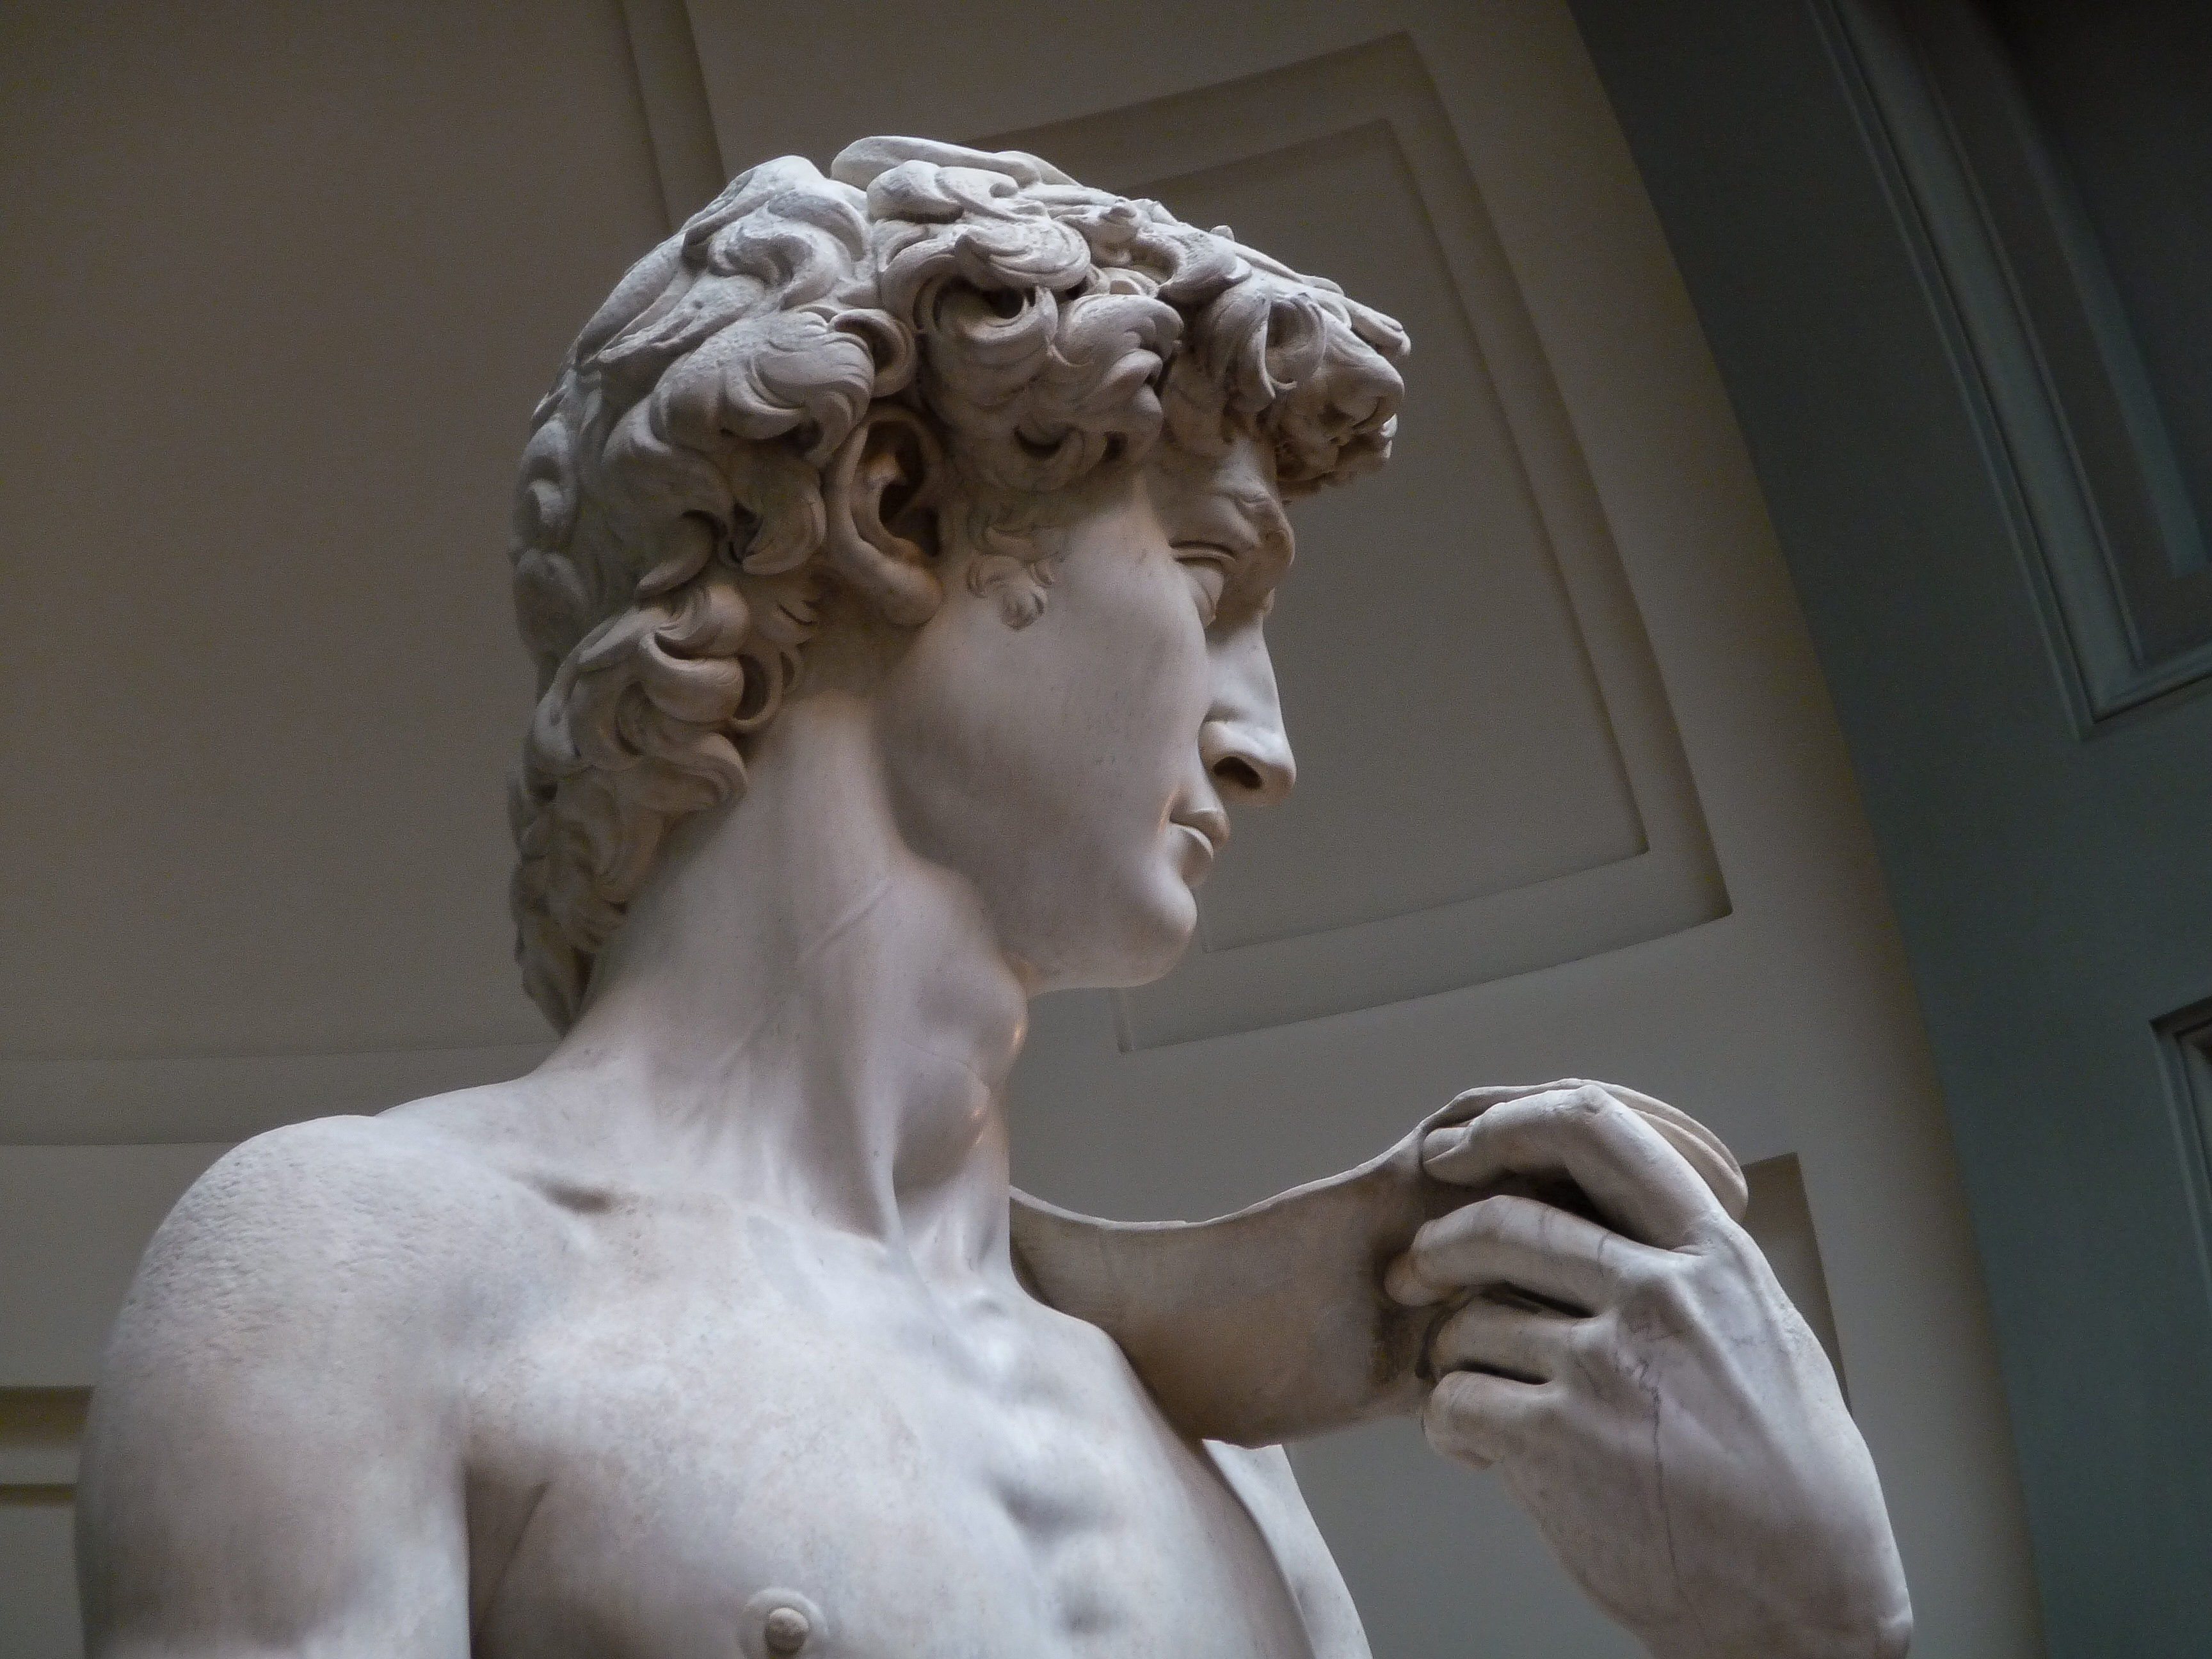 Michelangelo’s David was sculpted as a defender of democracy against tyranny. Much art done today by partners of IRI similarly advances democratic ideas even amid the threat of autocracy.